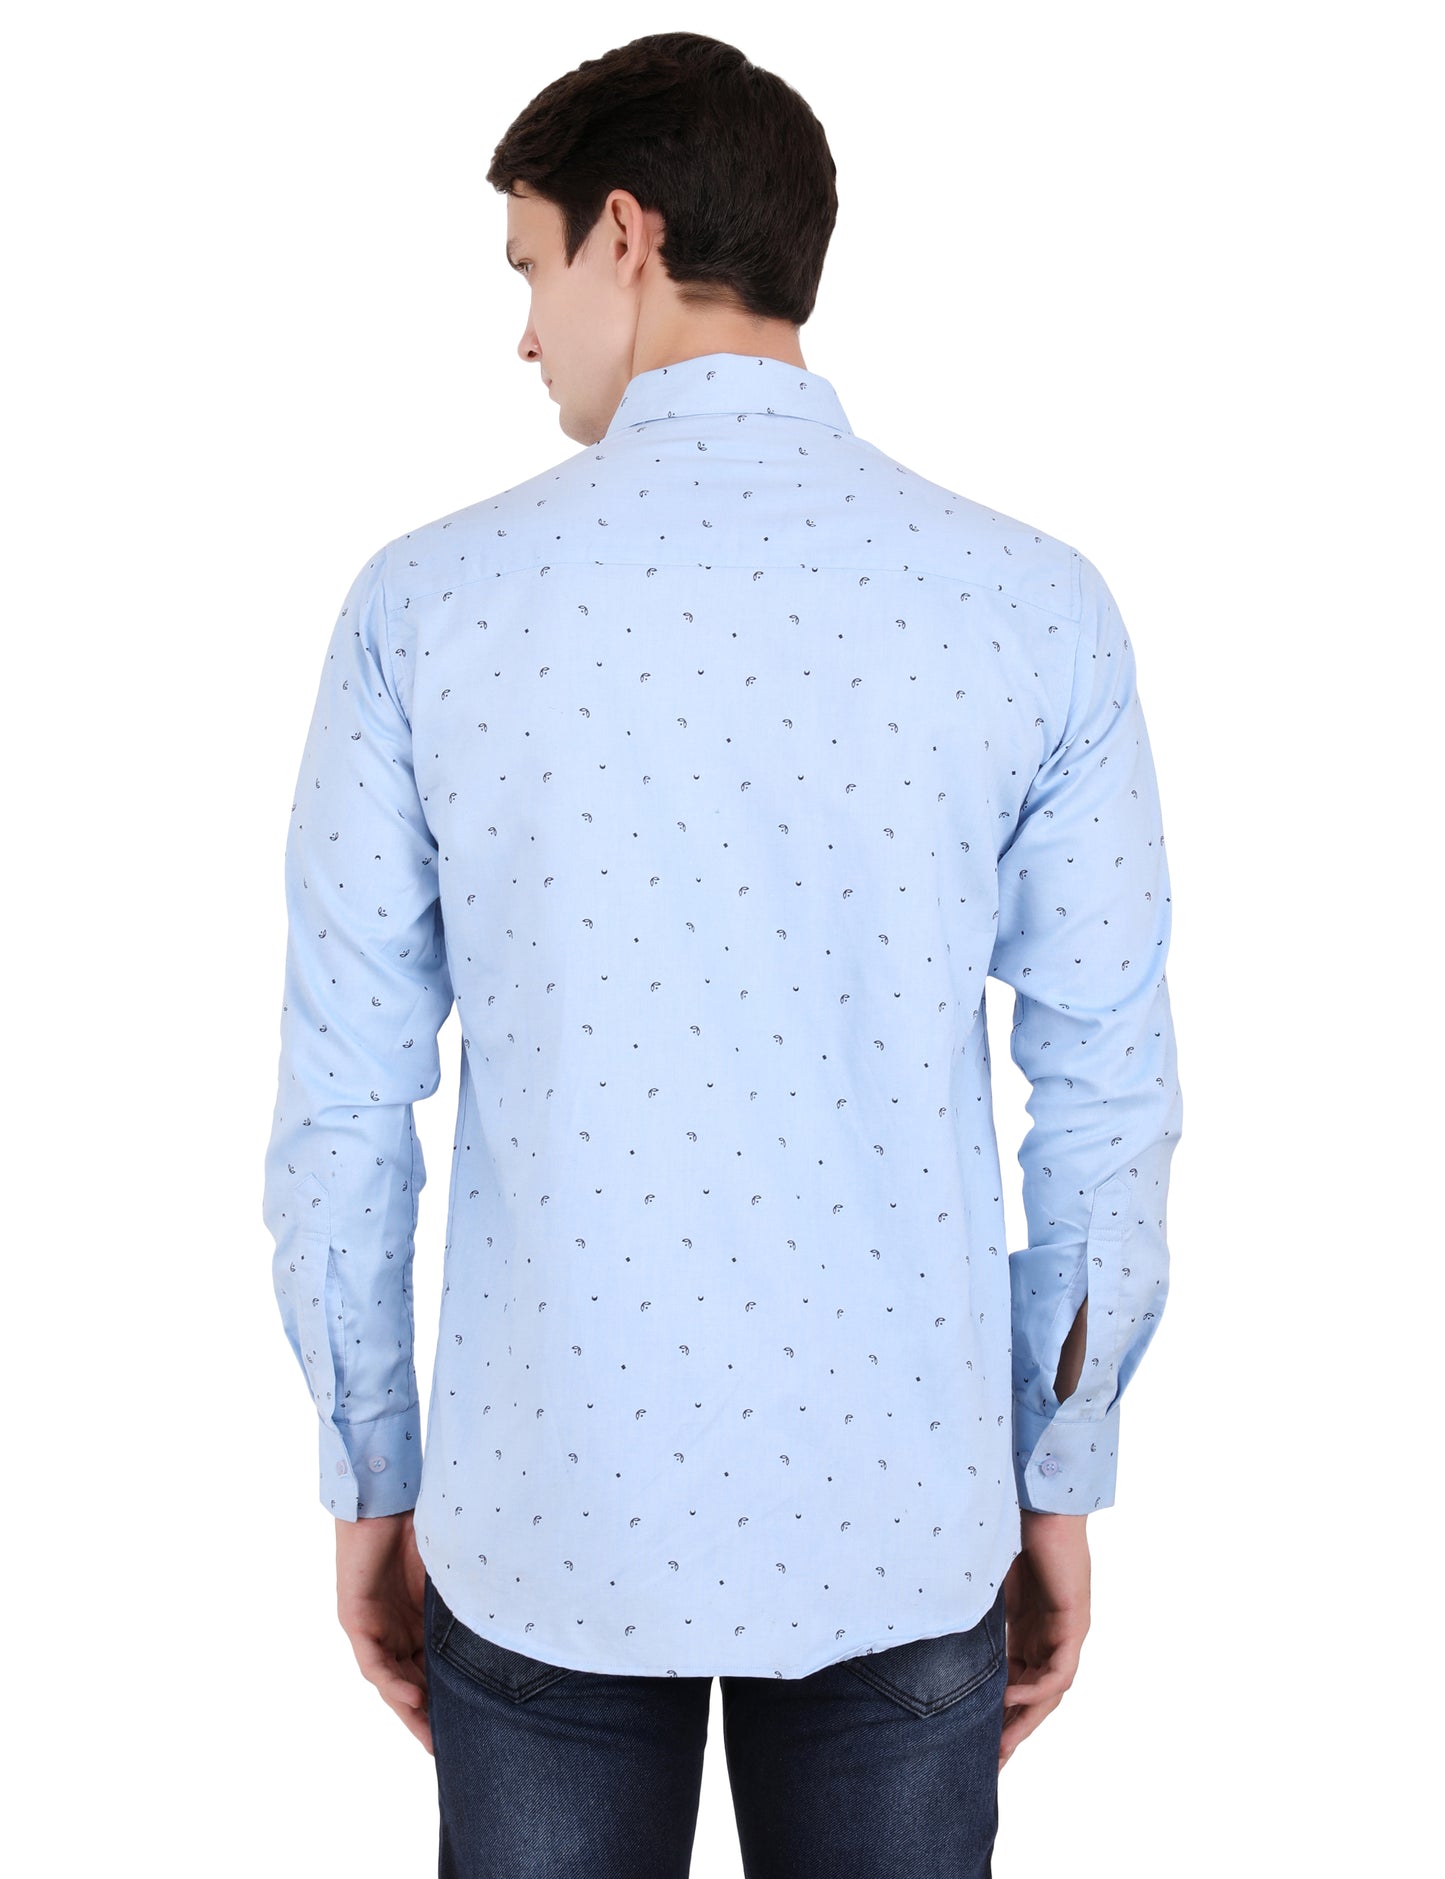 Chic Blue Shirt with Subtle Black Leaves - Elevate Your Wardrobe!